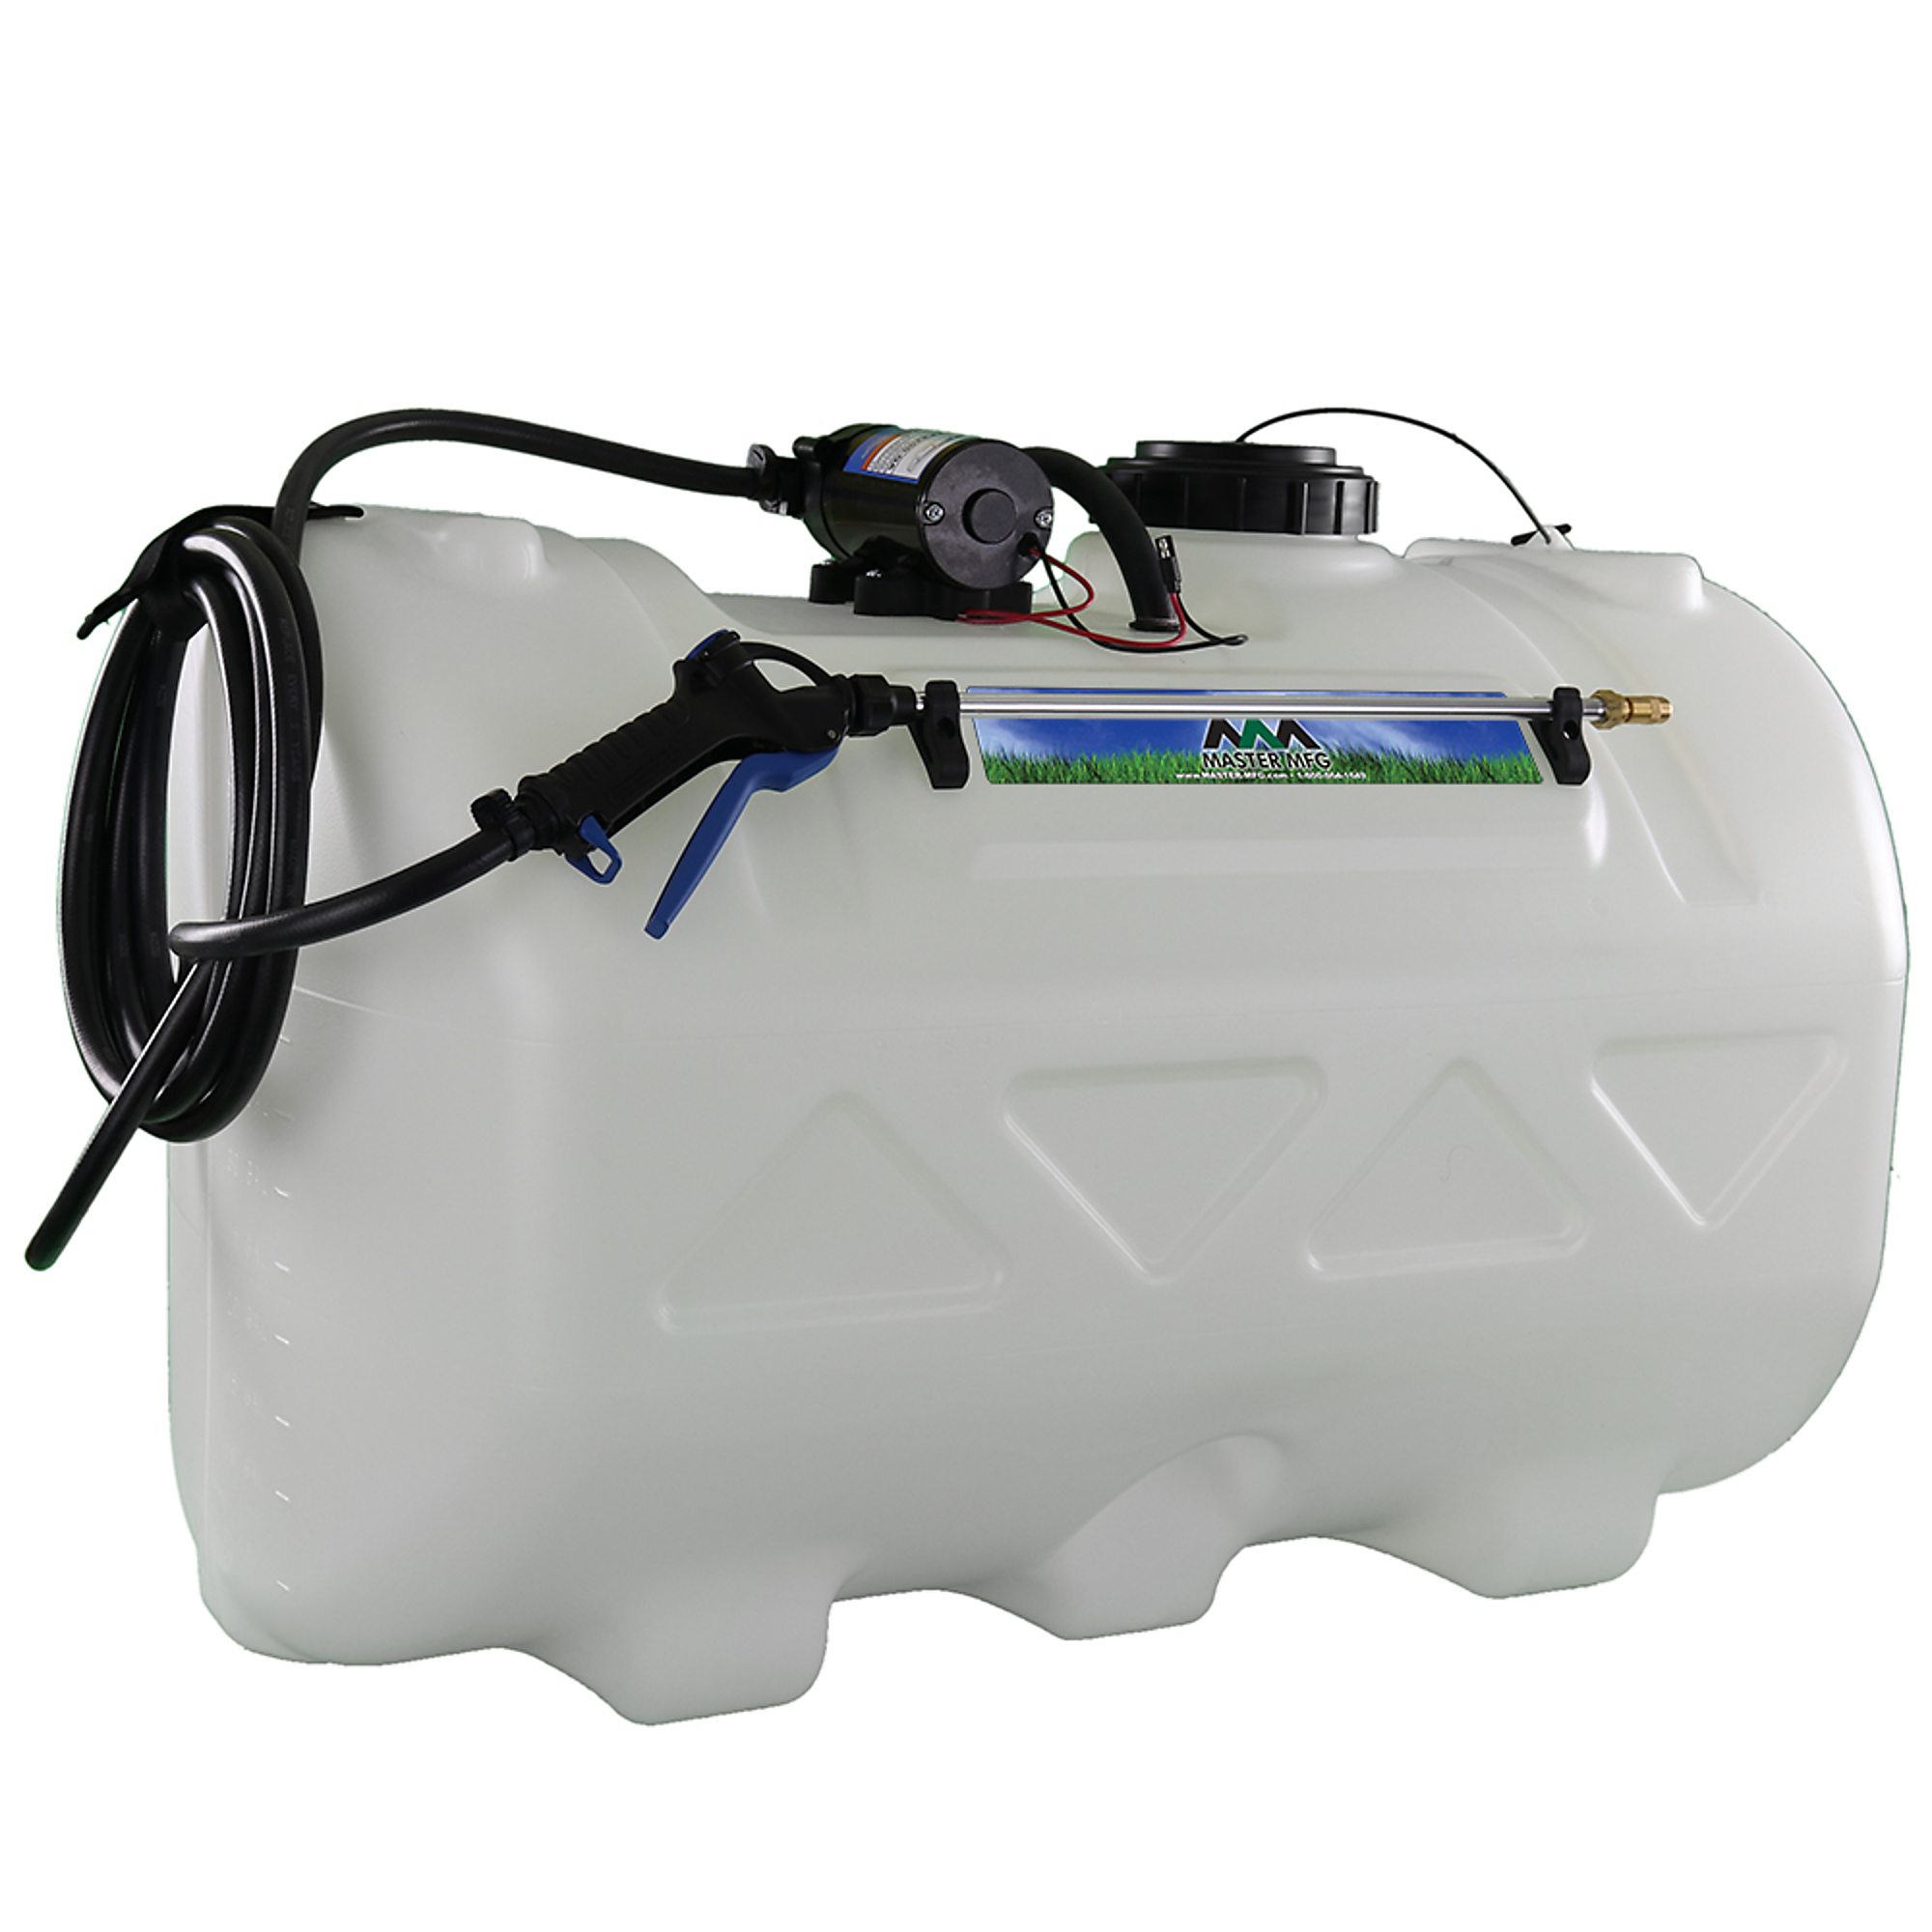 Master MFG, 60-Gal Deluxe Spot Sprayer - 2.2GPM, Tank Size 60 Gal, Flow 2.2 GPM, Pressure 70 PSI, Model SSO-01-060D-MM